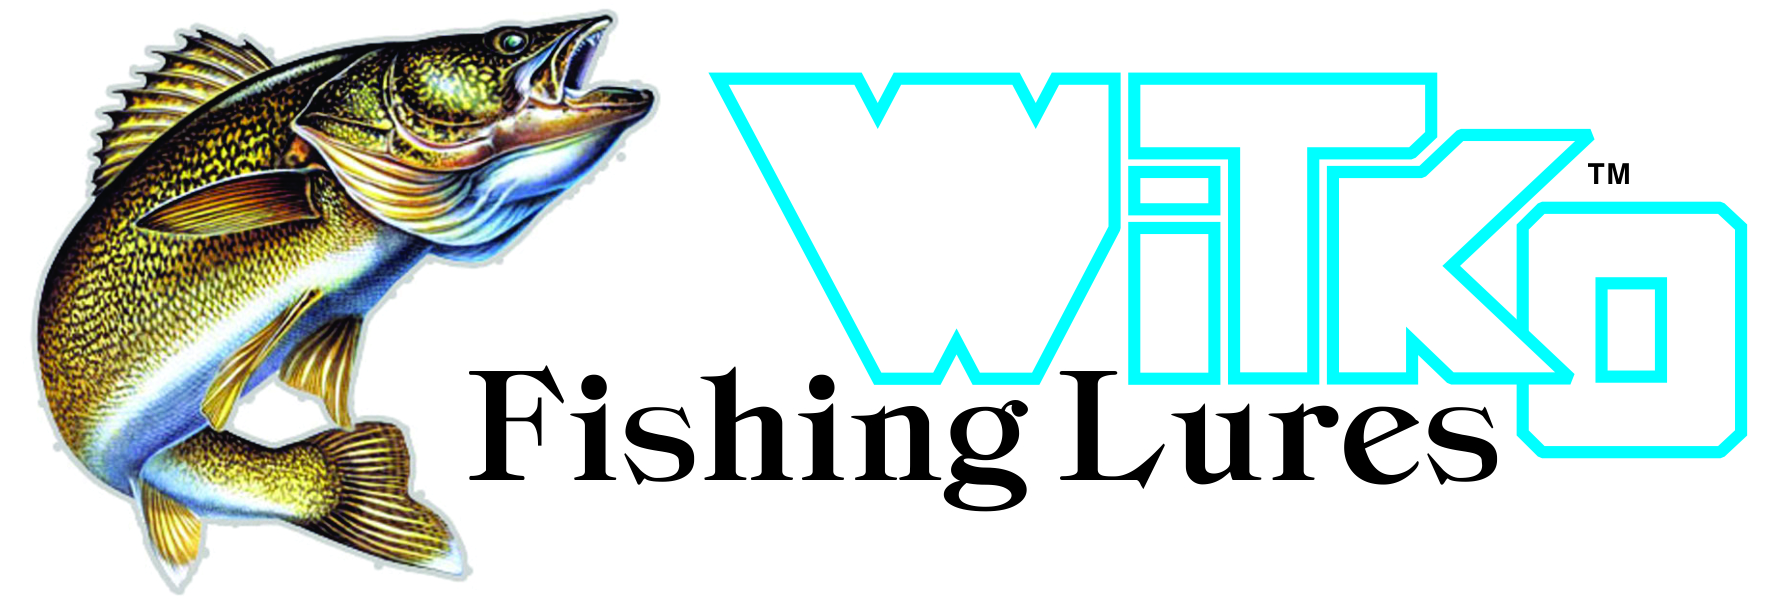 Fishing Lures by Witko